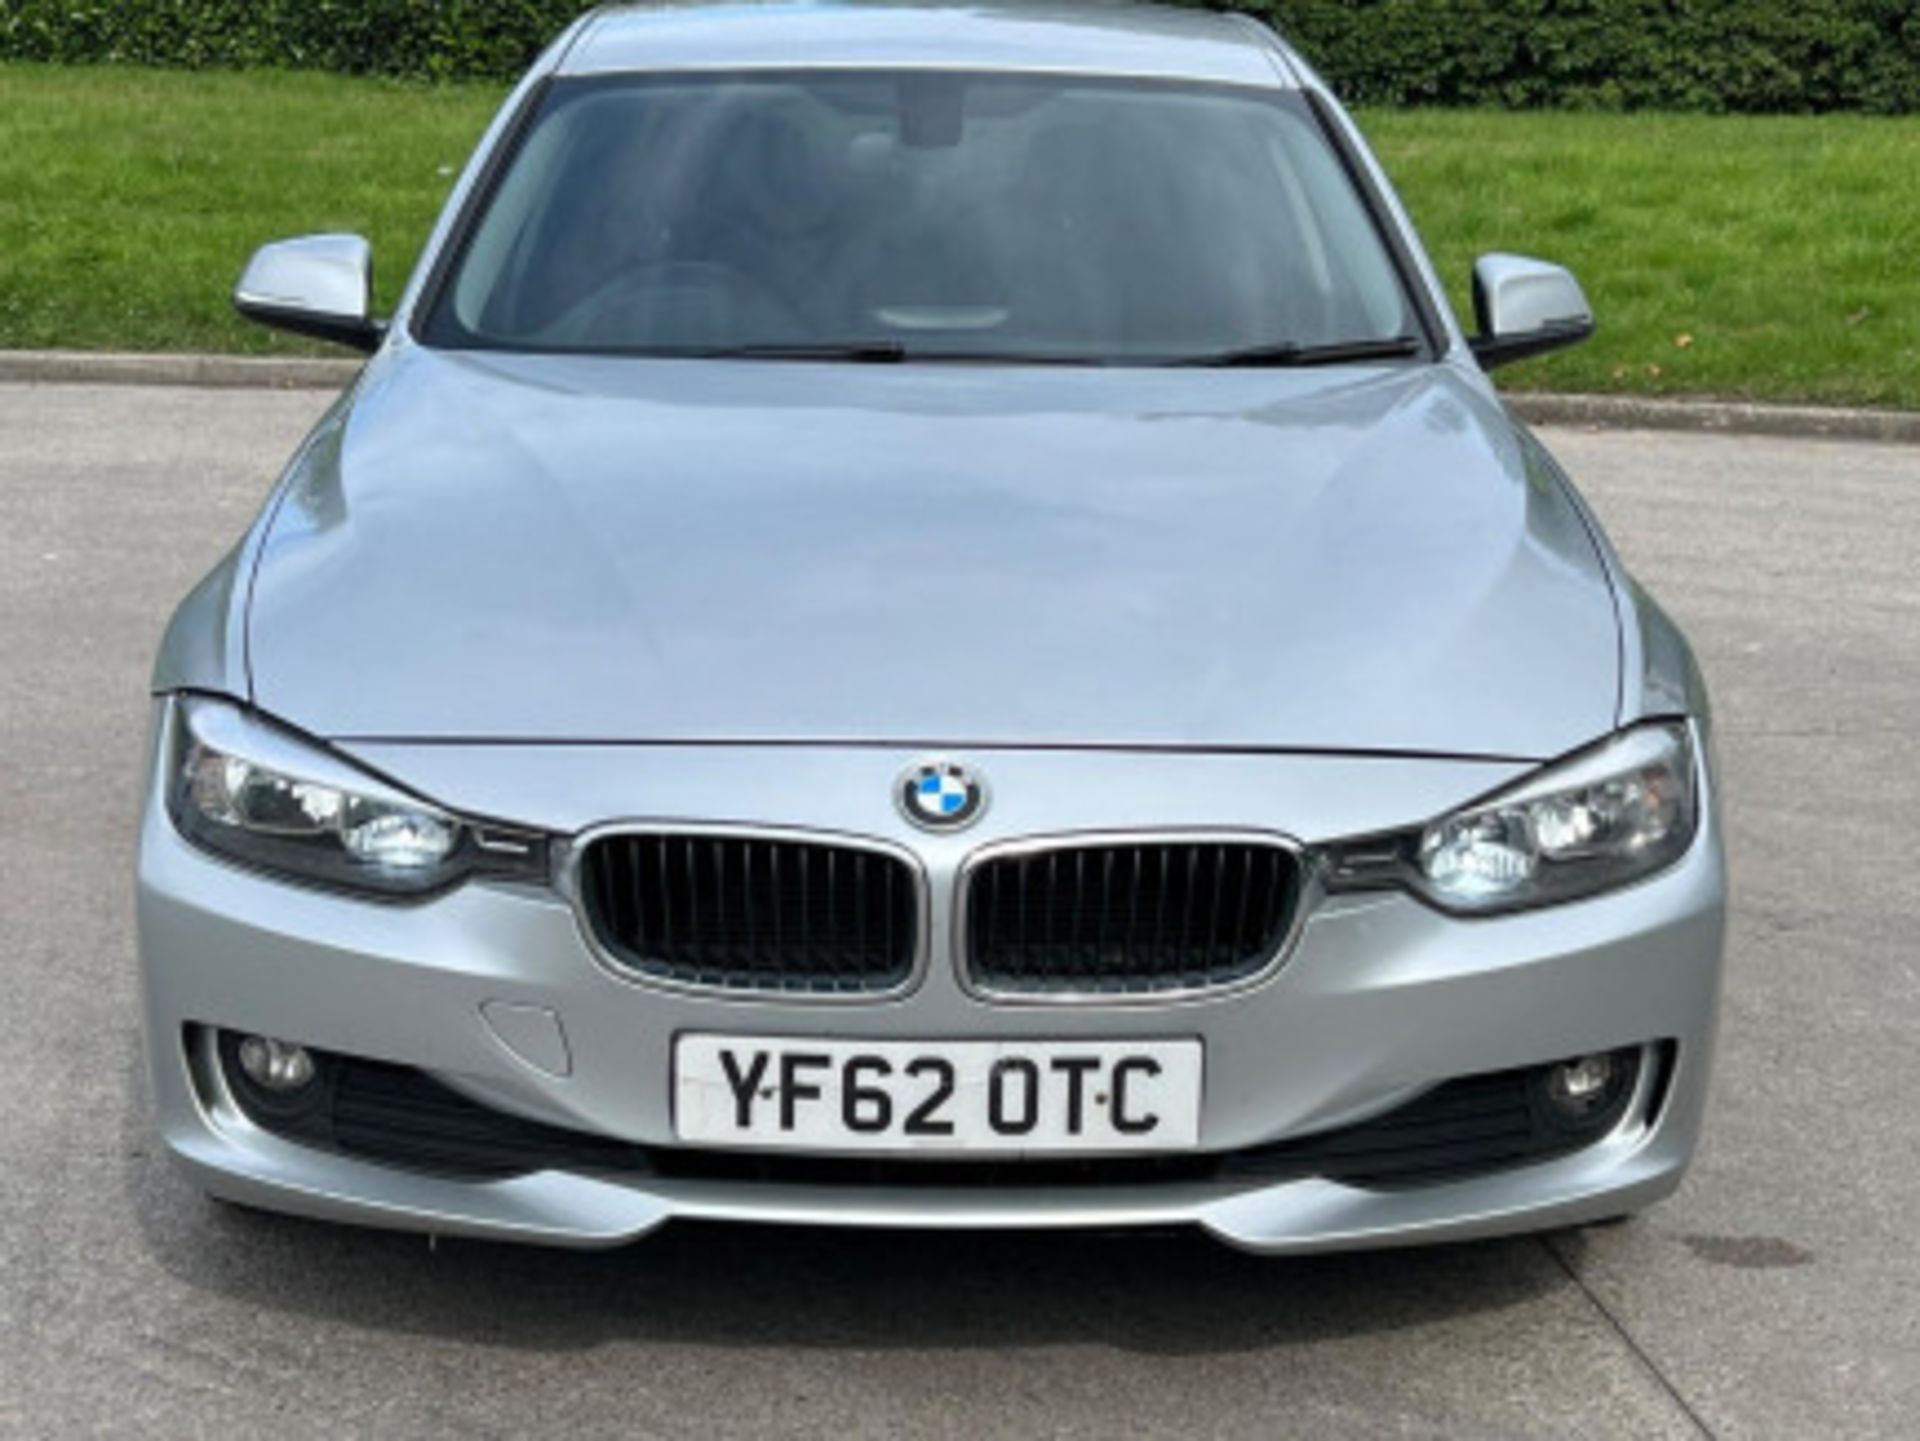 BMW 3 SERIES 2.0 DIESEL ED START STOP - A WELL-MAINTAINED GEM >>--NO VAT ON HAMMER--<< - Image 113 of 229